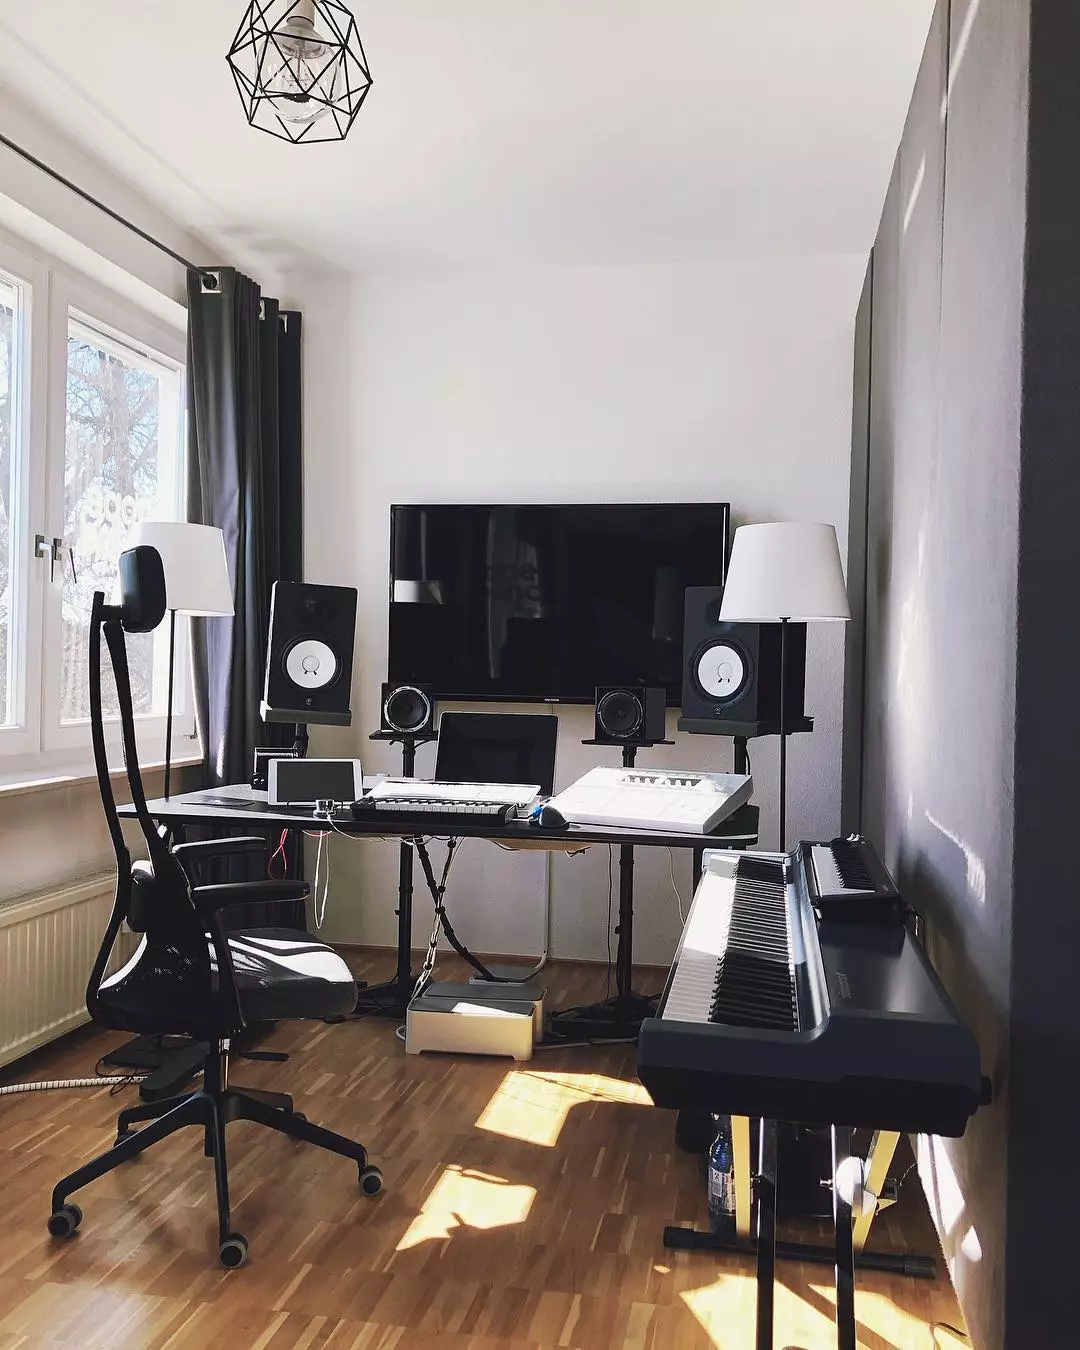 https://www.extraspace.com/blog/wp-content/uploads/2018/06/turning-spare-room-into-home-music-room-room-dividers.jpg.webp